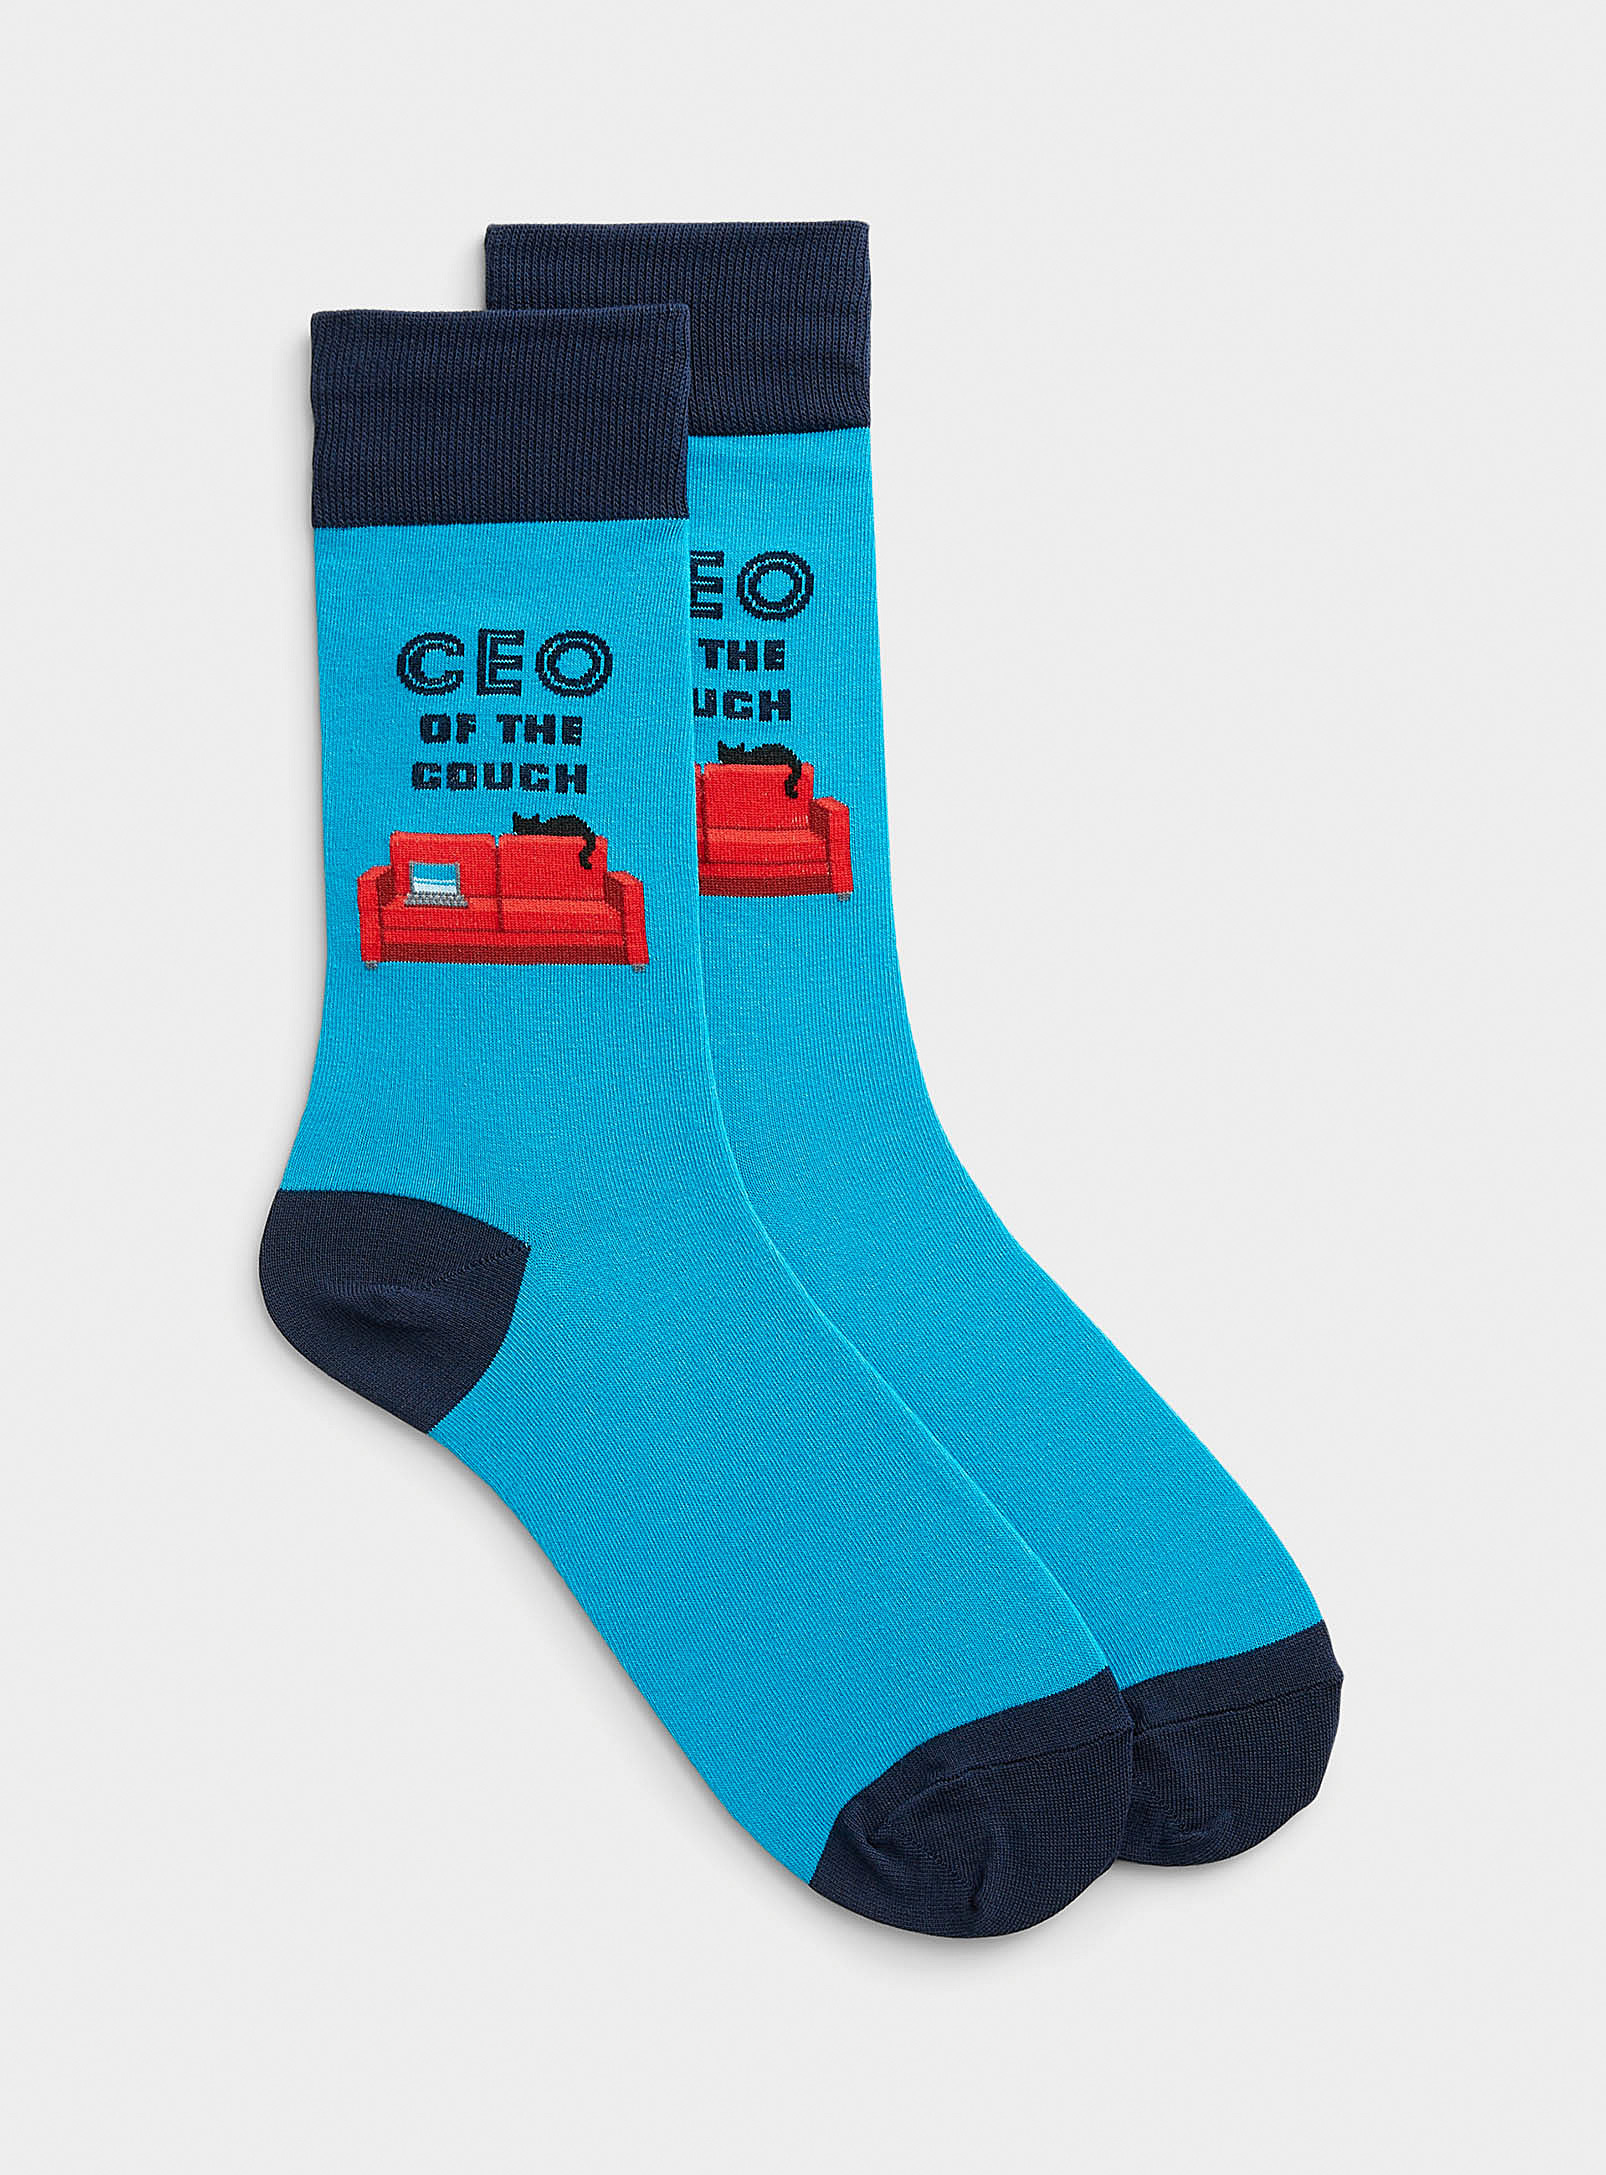 Hot Sox Ceo Of The Couch Sock In Black